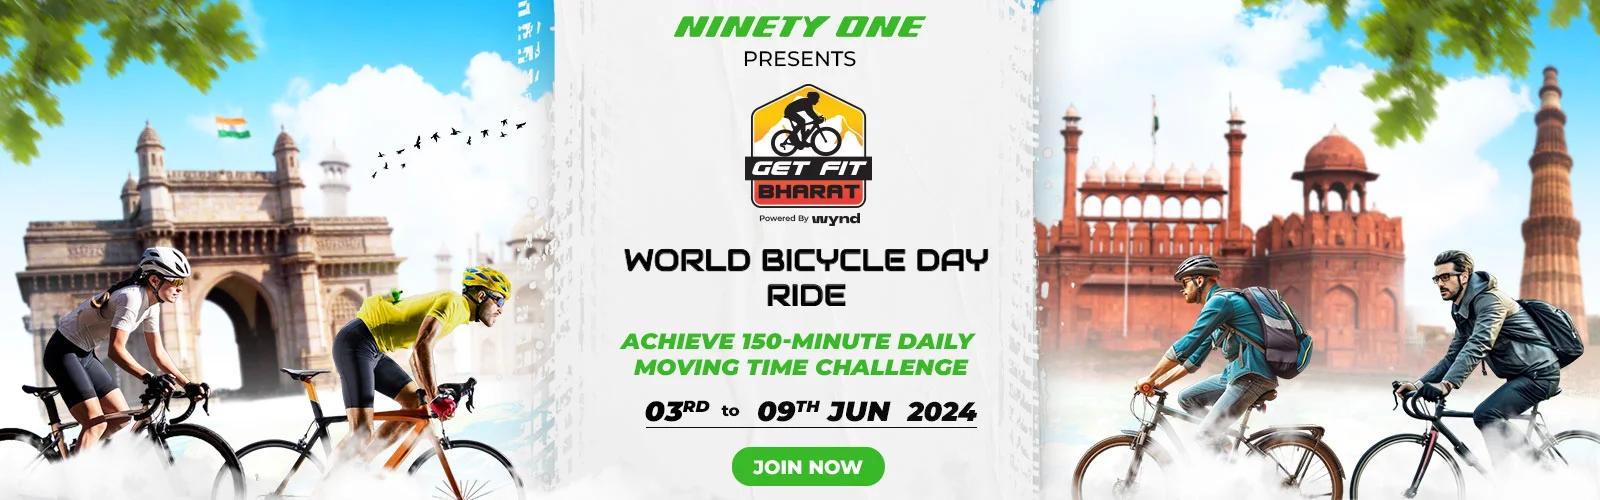 Get Fit Bharat World Bicycle Day Ride